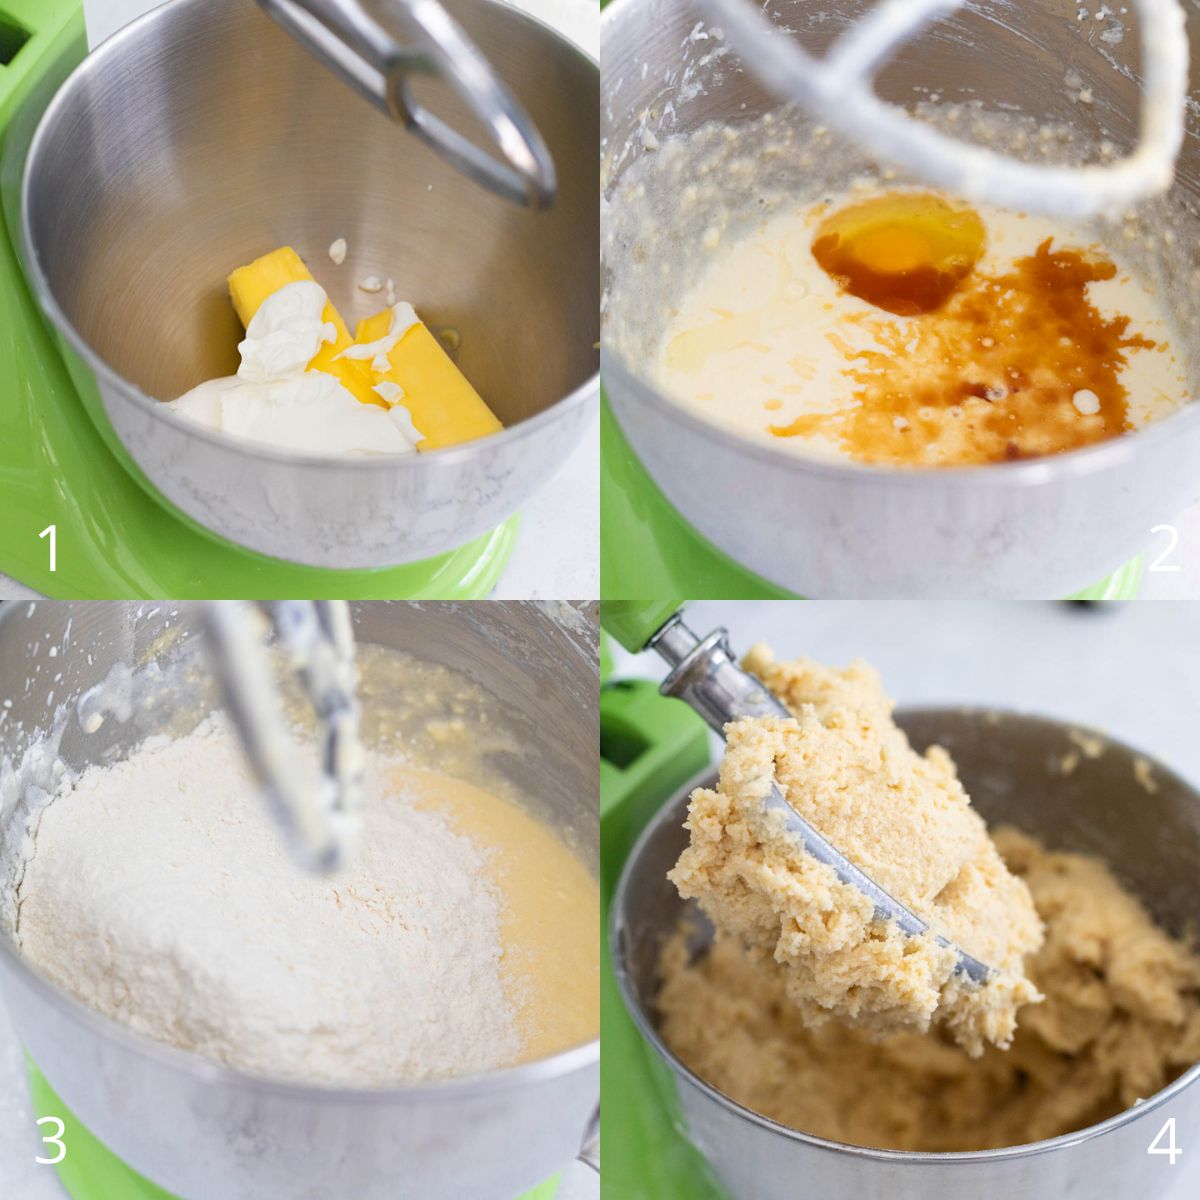 The step by step photo collage shows how to prepare the soft sugar cookie dough.